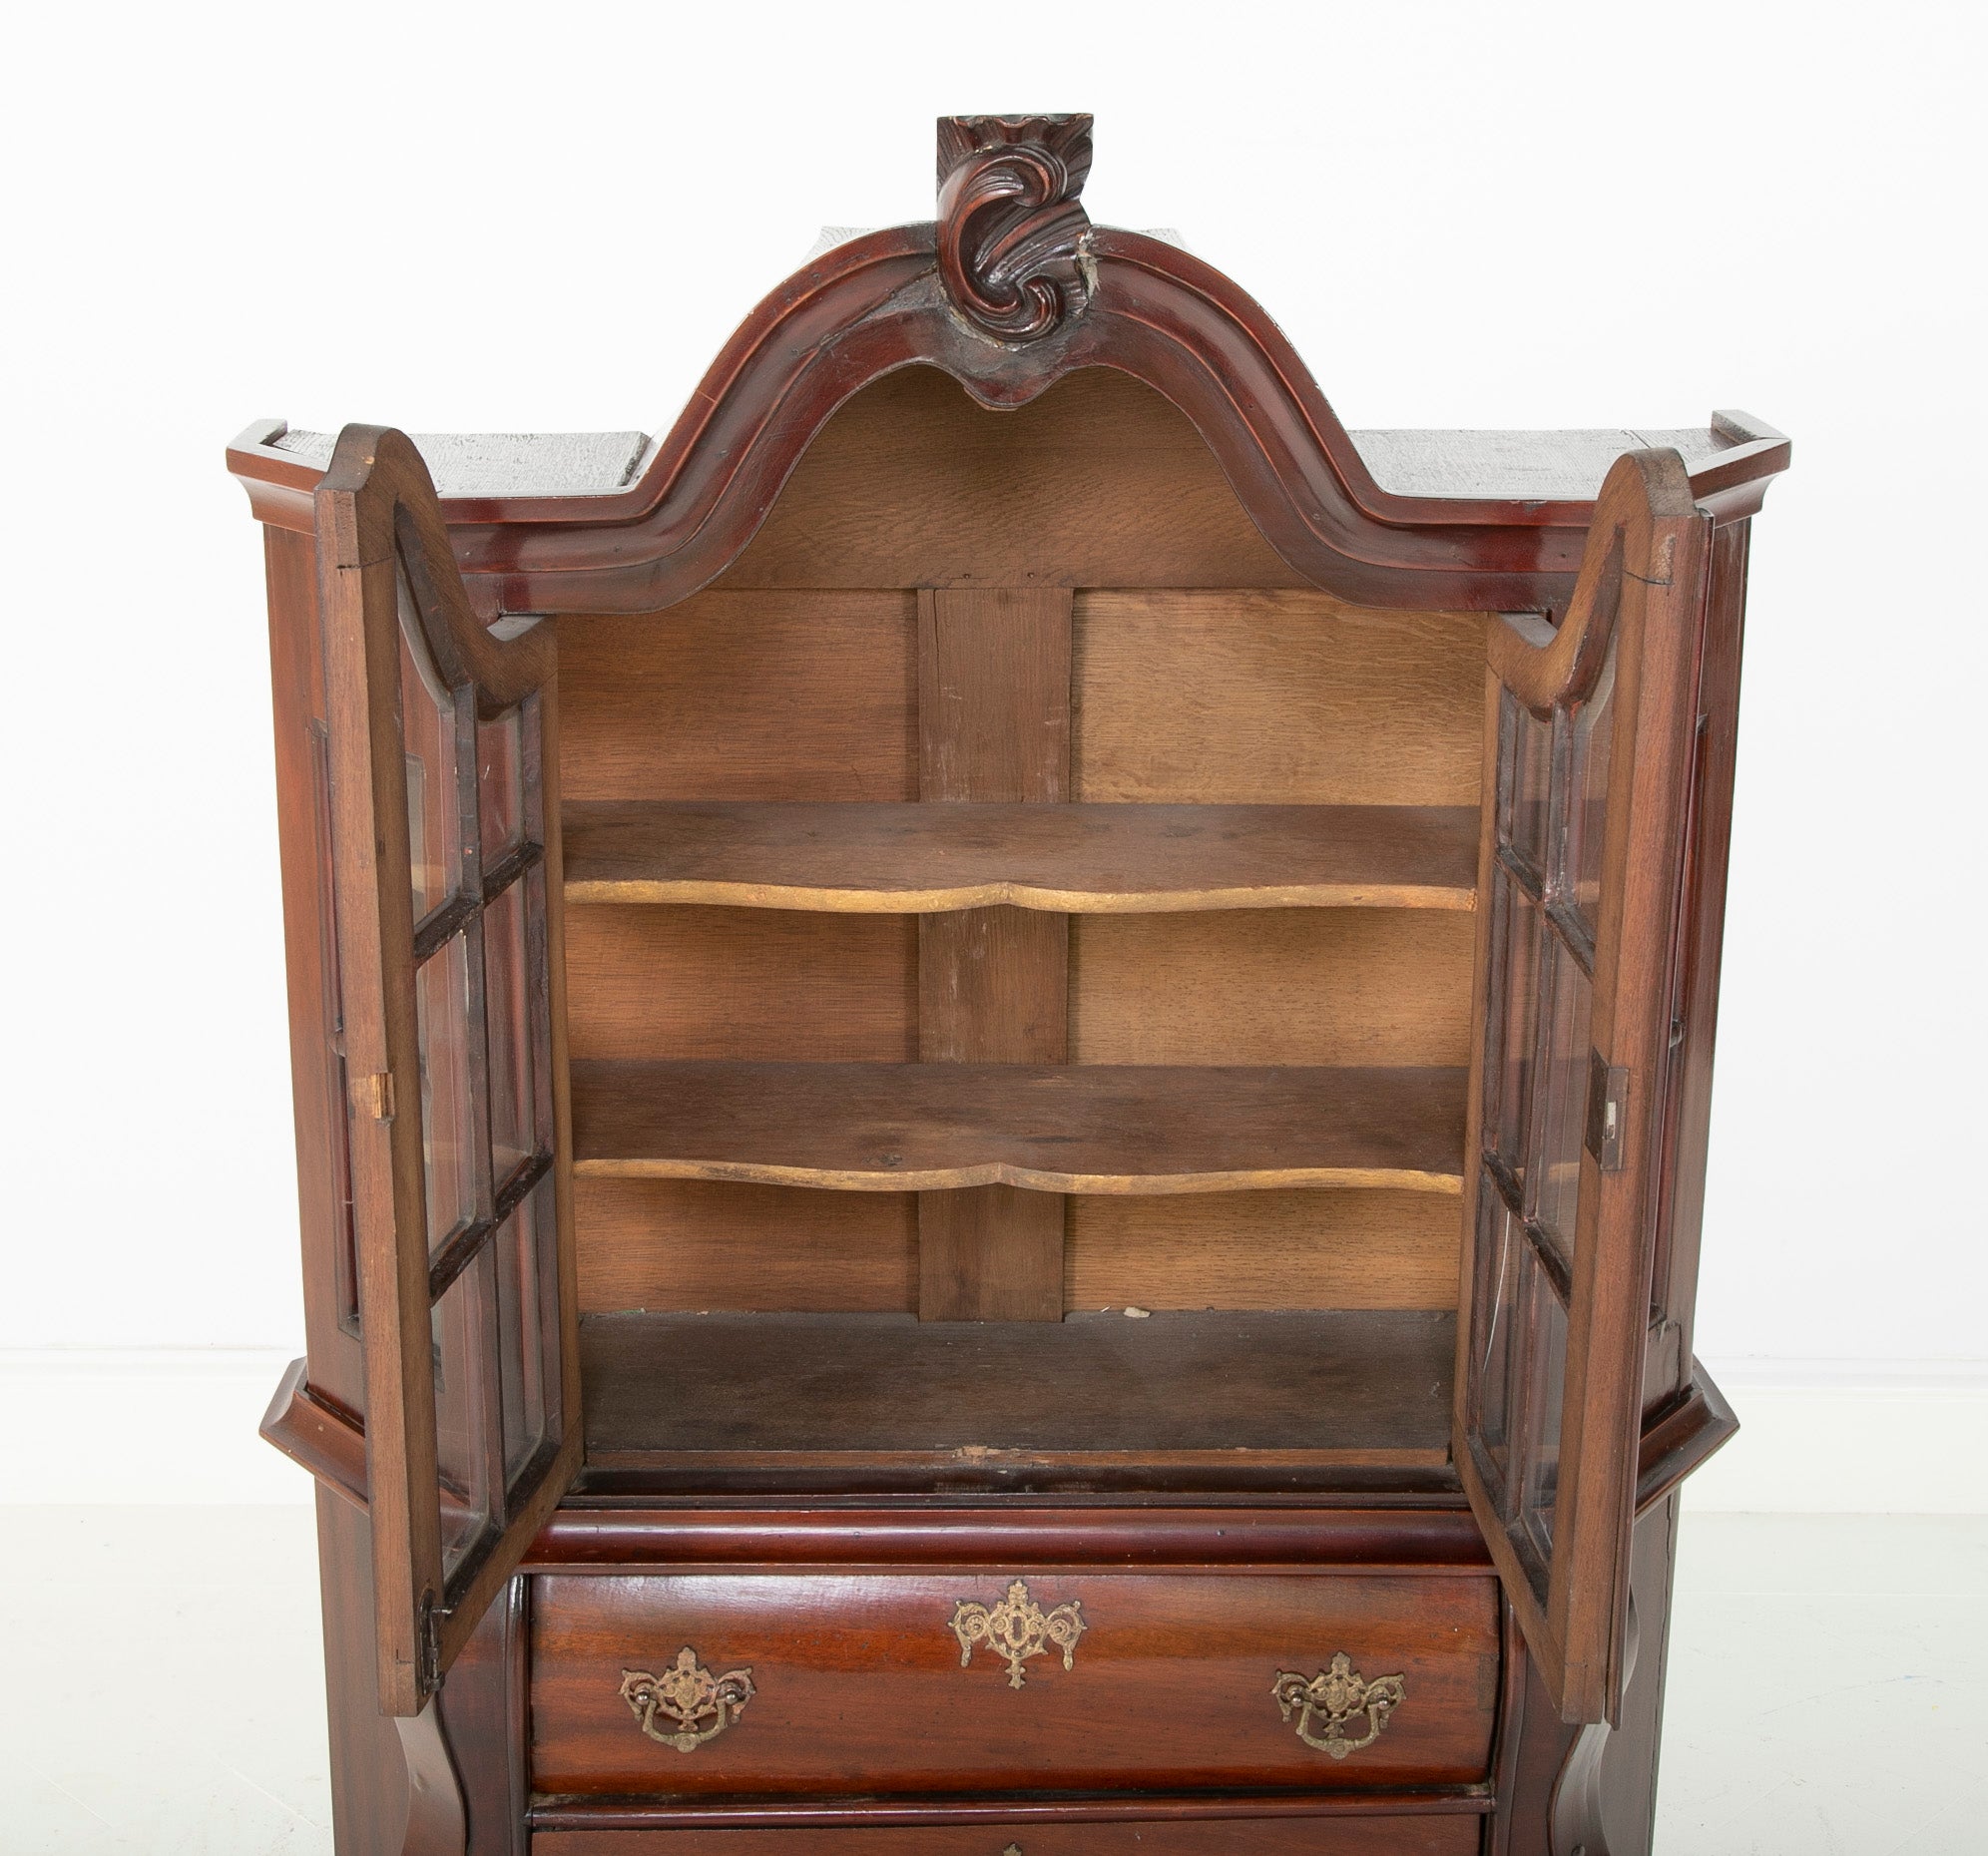 A Late 18th Century Miniature Dutch Kettle Base Paw Foot Bookcase